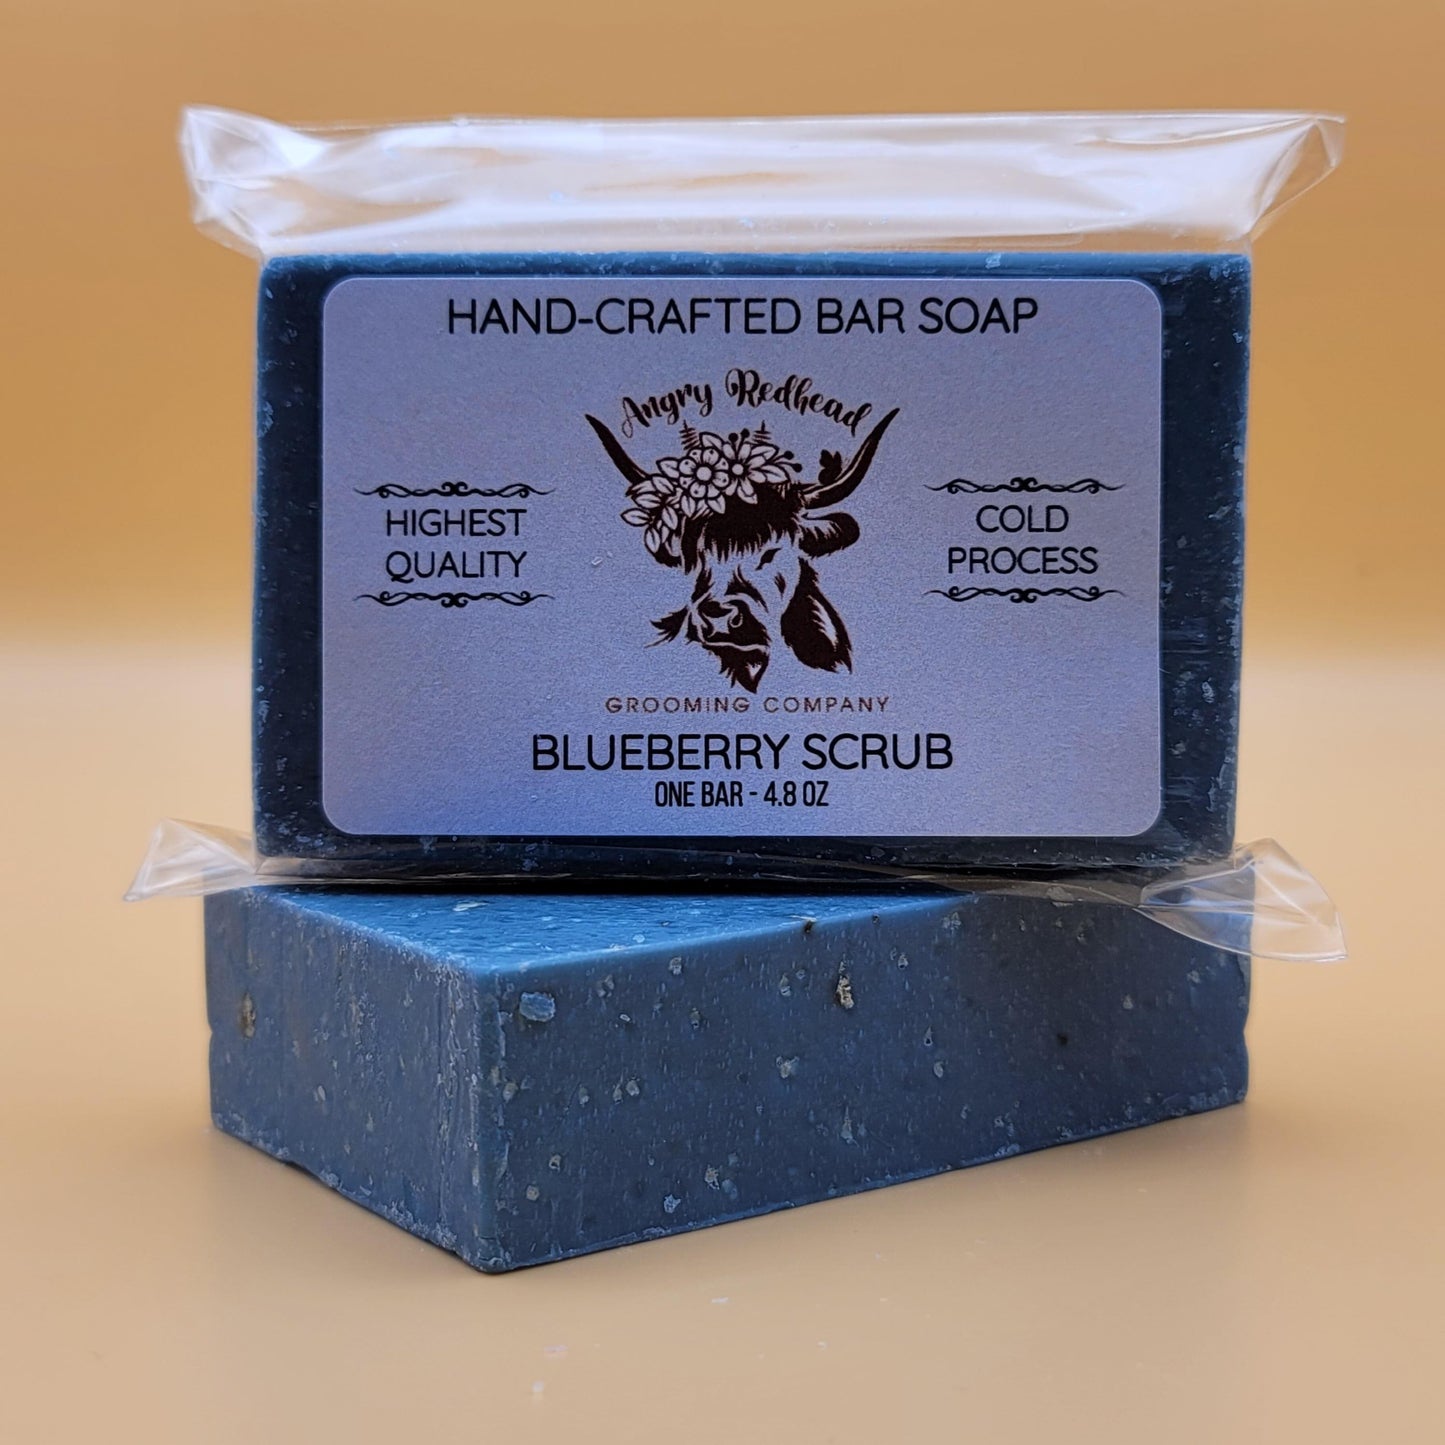 Blueberry Scrub Bar Soap by Angry Redhead Grooming Co - angryredheadgrooming.com